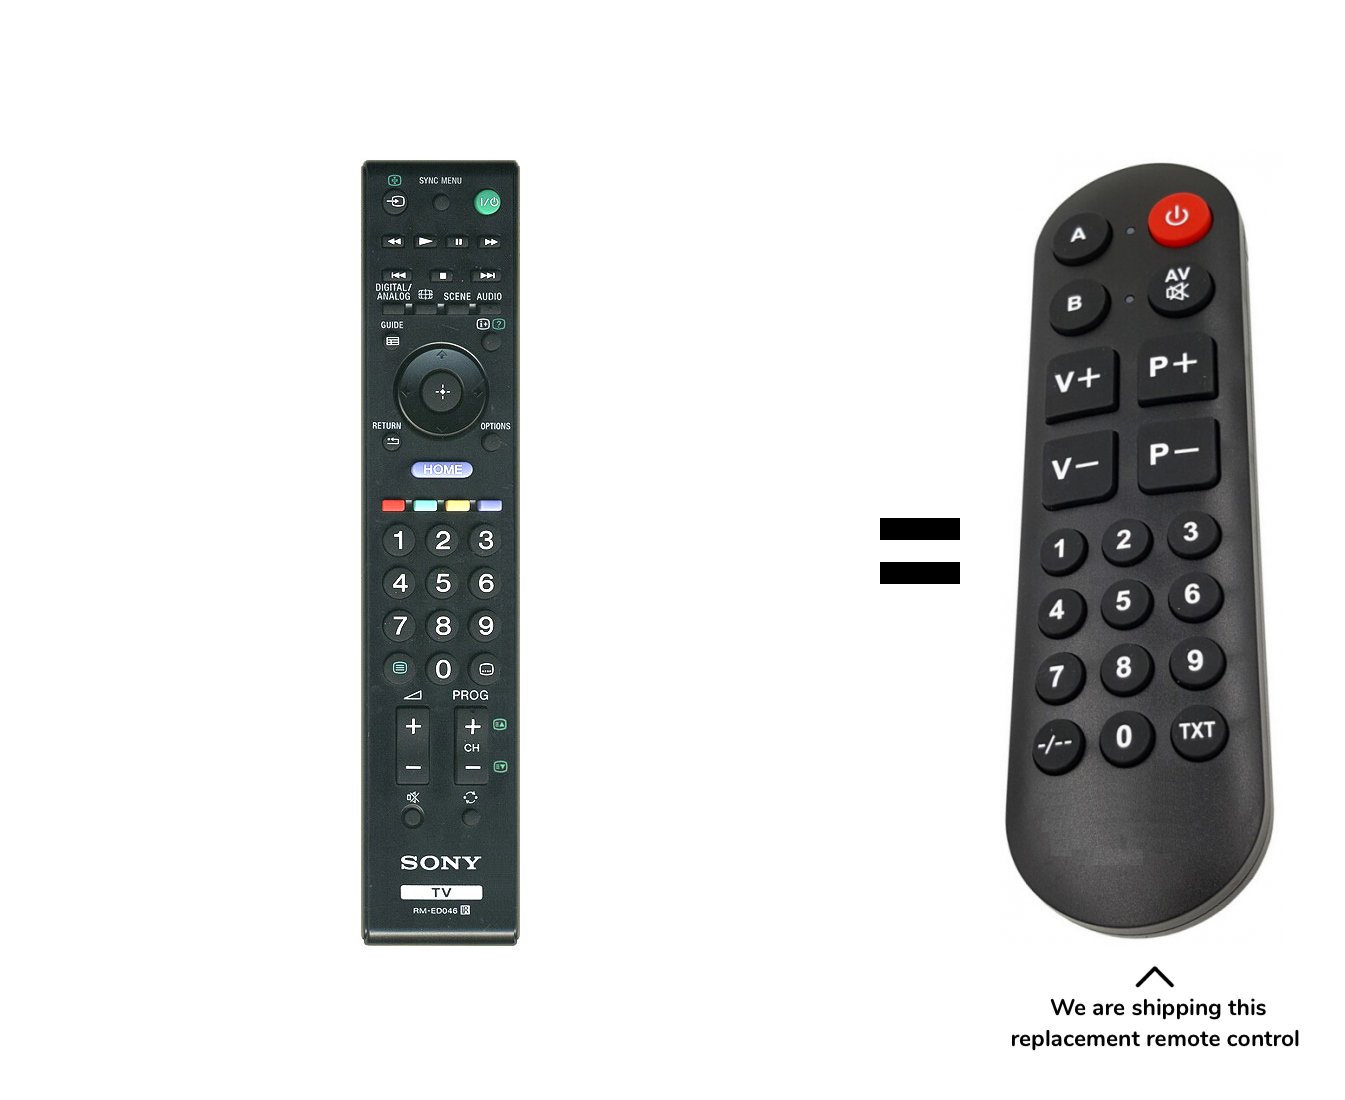 Sony RM-ED046 remote control for seniors